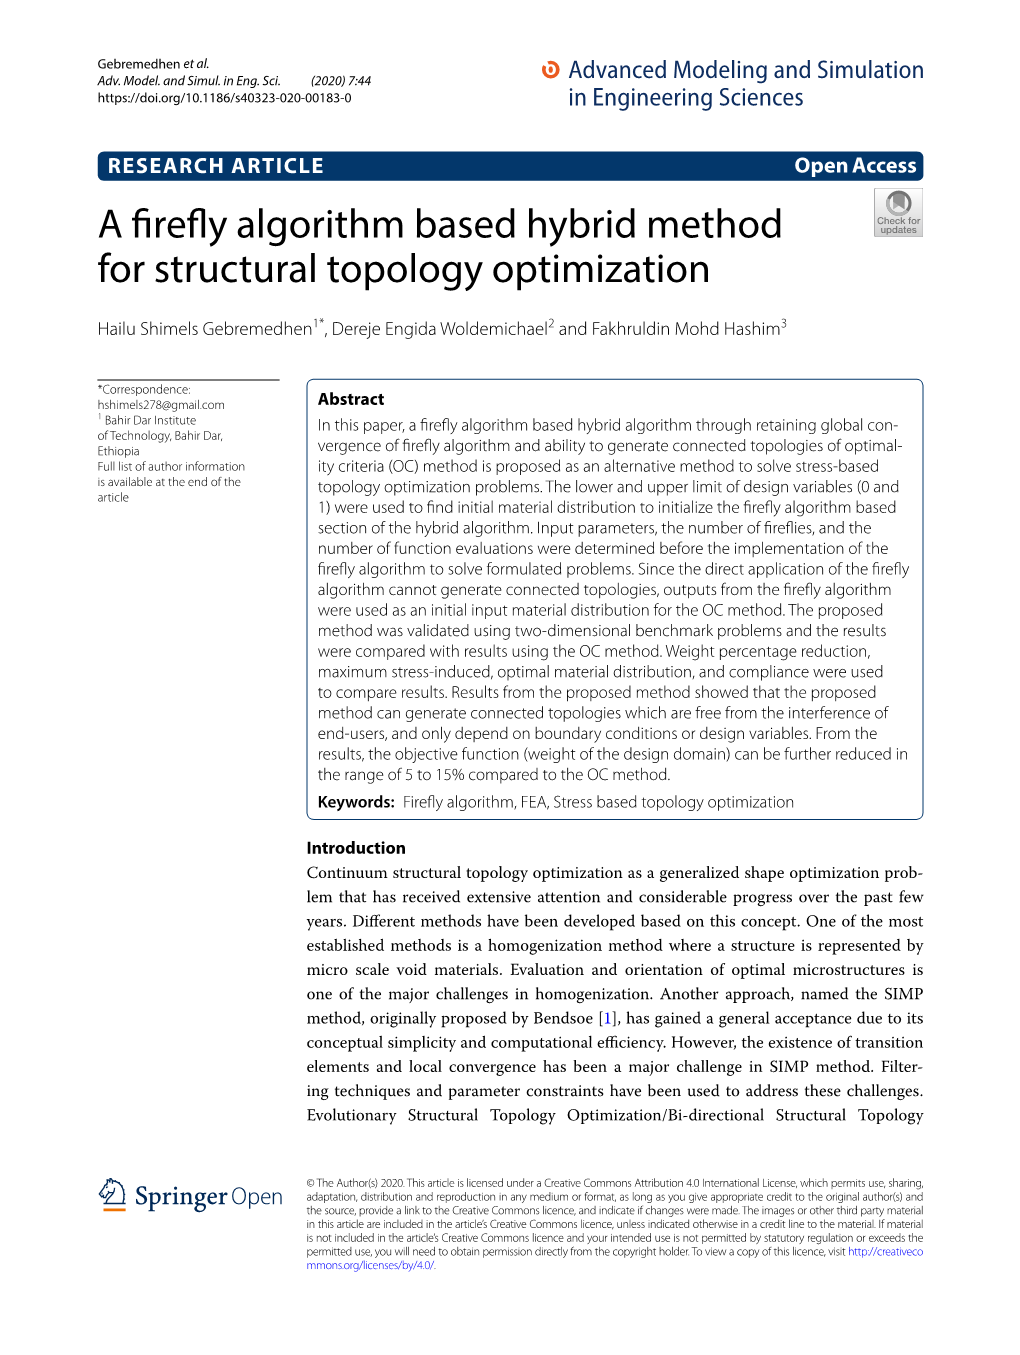 A Firefly Algorithm Based Hybrid Method for Structural Topology